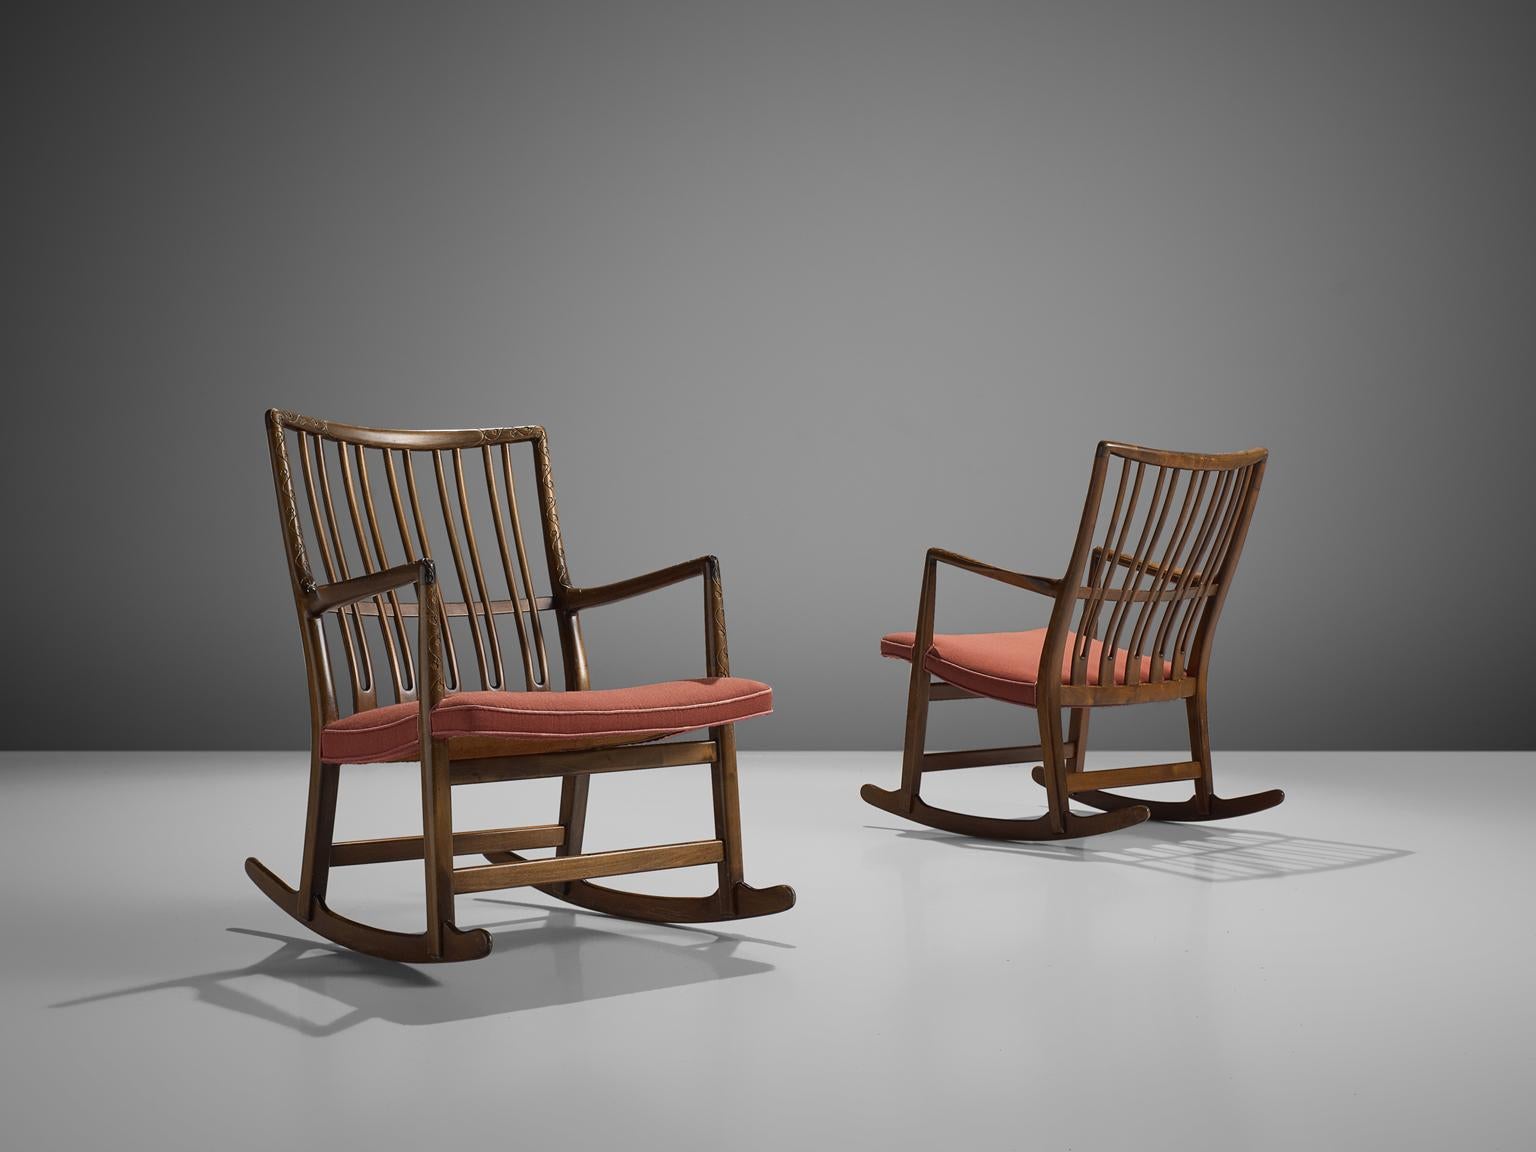 Hans Wegner for Mikael Laursen, set of two beech rocking chairs model ML-33, Denmark, 1940s.

These rocking chairs are an early design of Hans Wegner, produced by master-carver and cabinetmaker Mikael Laursen. Model ML-33 is known as the first